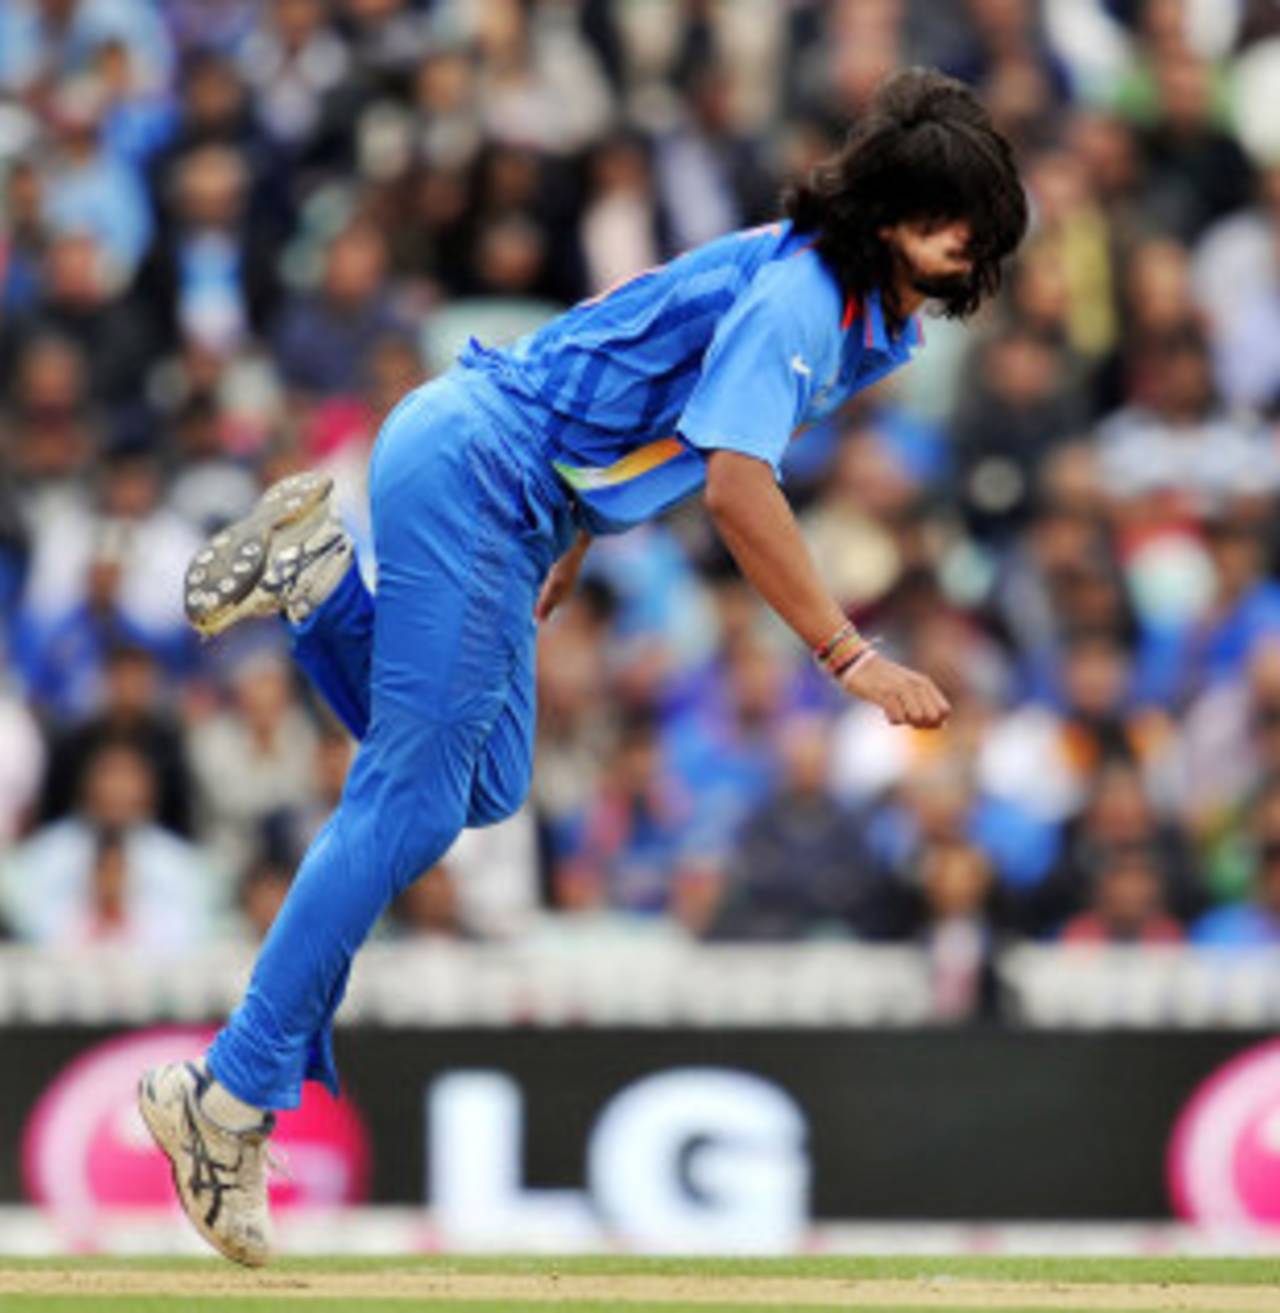 Ishant Sharma in his delivery stride, India v West Indies, Champions Trophy, Group B, The Oval, June 11, 2013